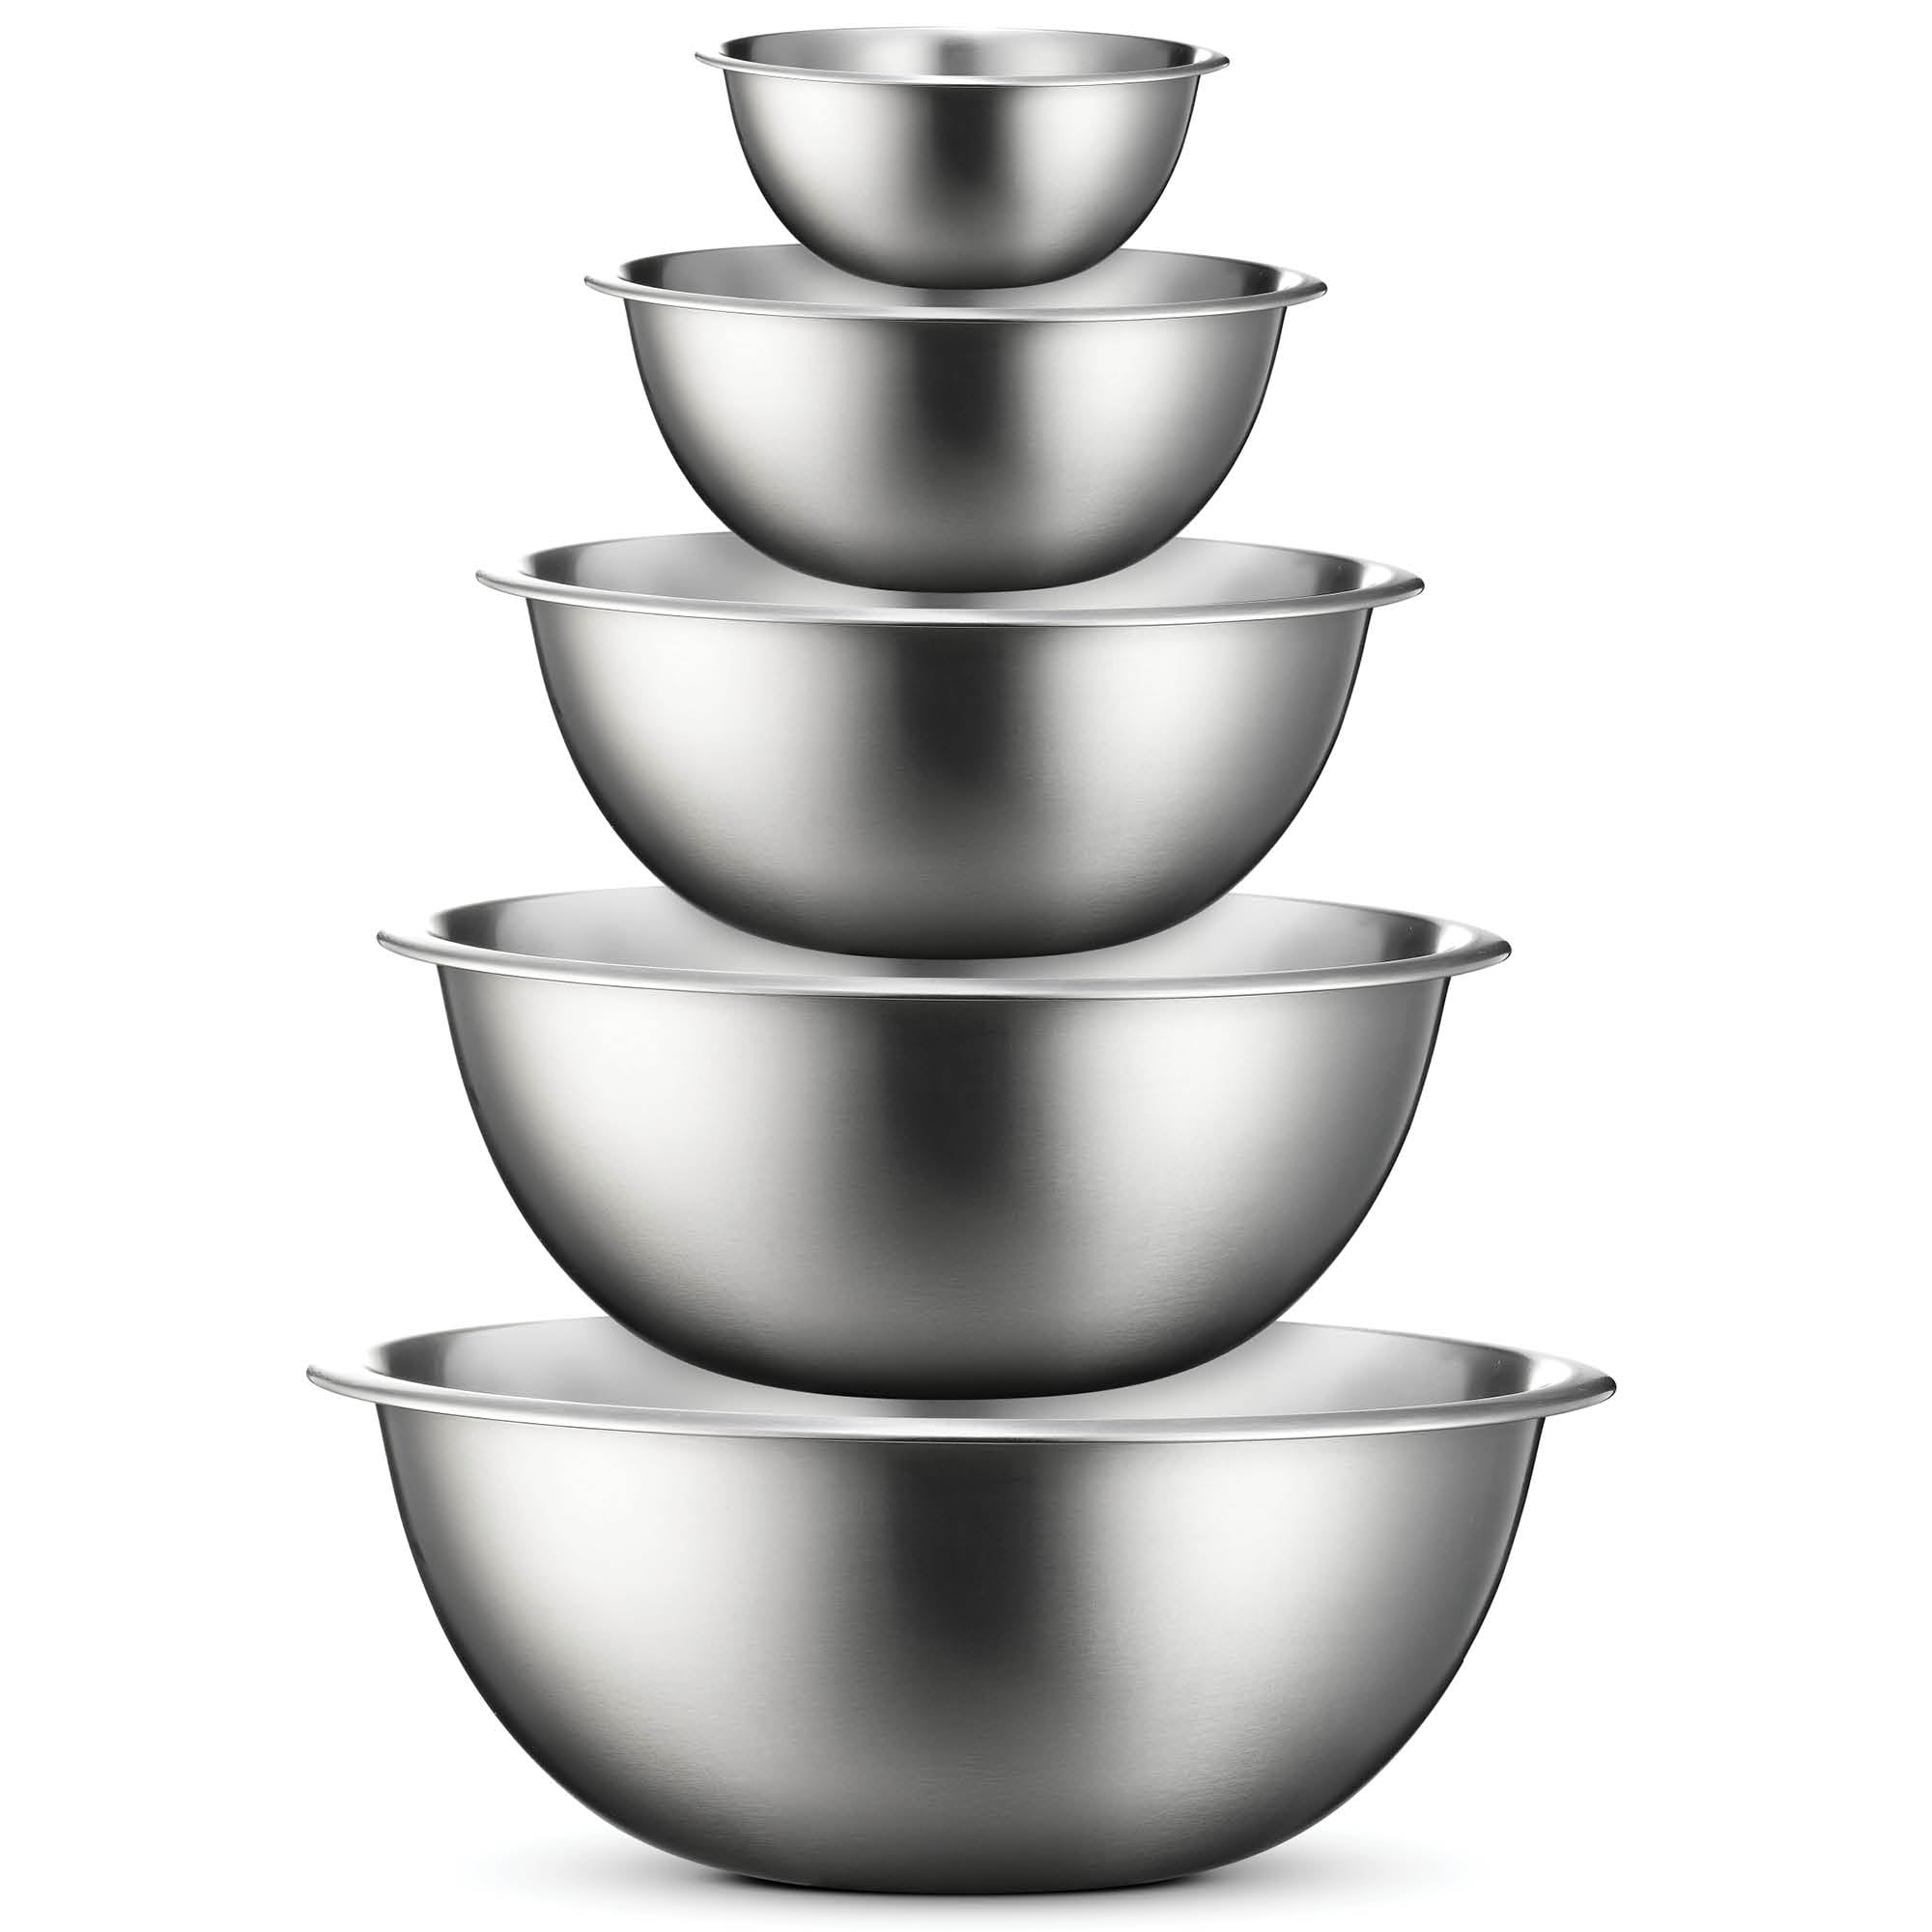 FineDine Stainless Steel Mixing Bowls (Set of 6) - Easy to Clean, Nesting Bowls for Space Saving Storage, Great for Cooking, Baking, Prepping